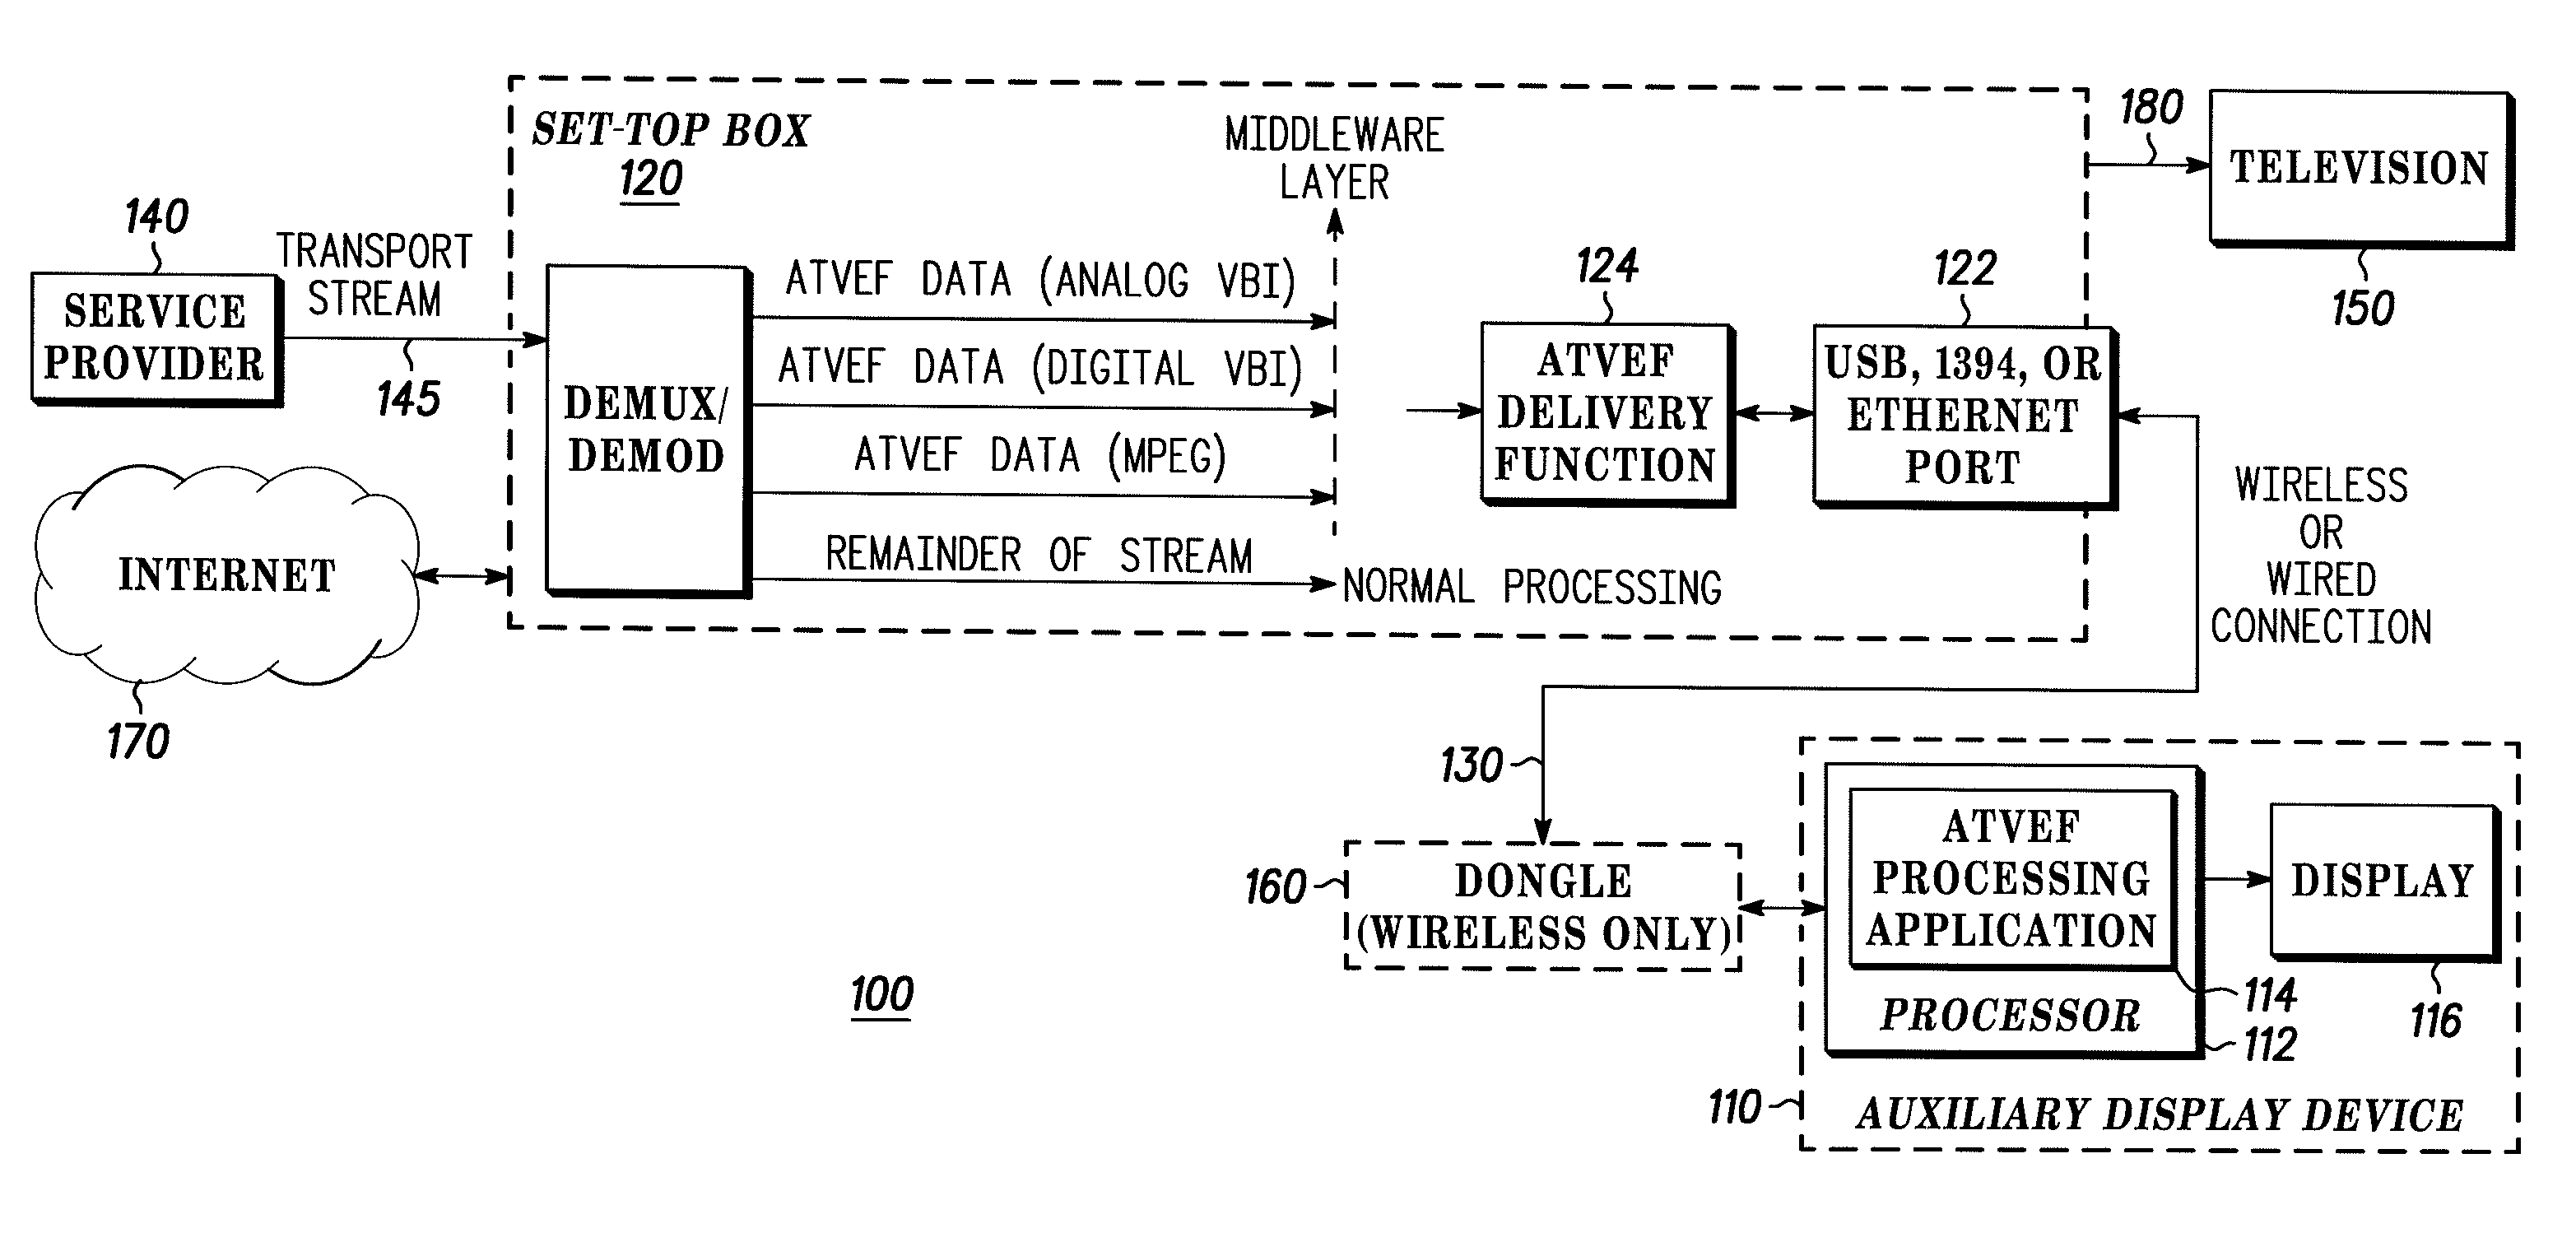 Method and Apparatus for Forwarding Television Channel Video Image Snapshots to an Auxiliary Display Device